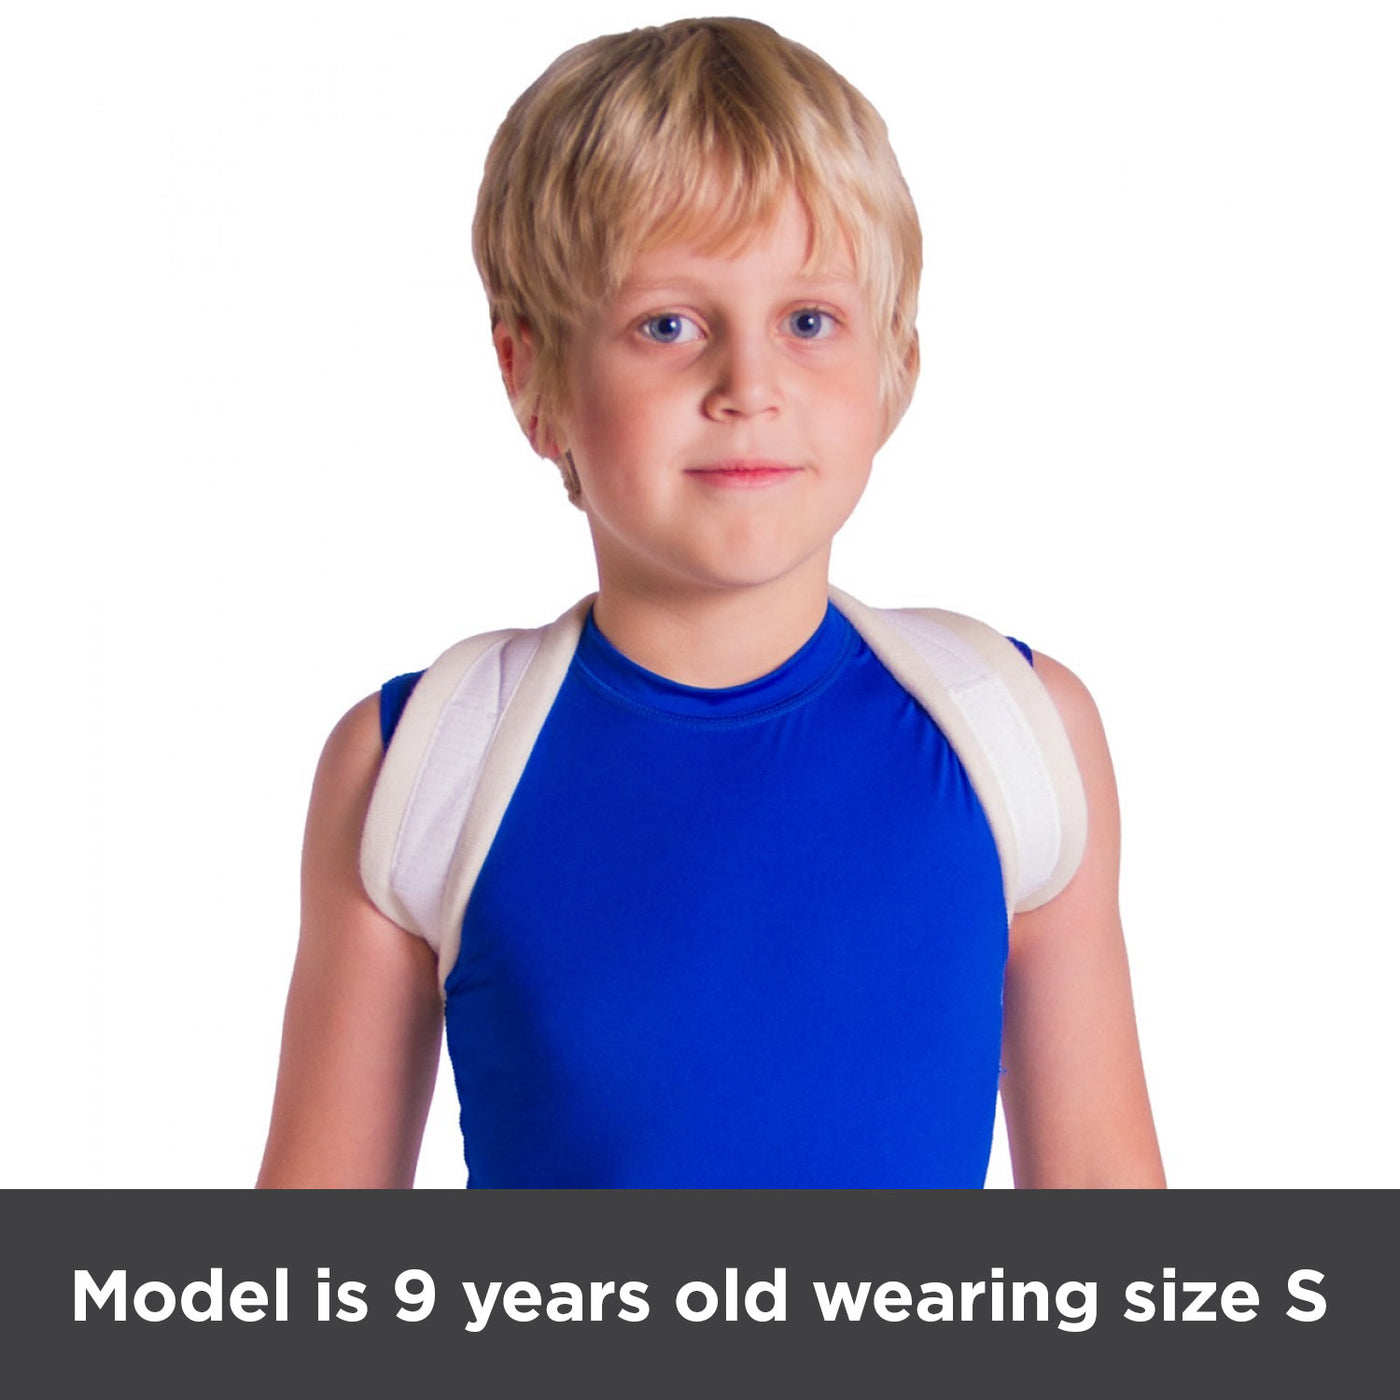 Model pictured is 9 years old and wearing a size small